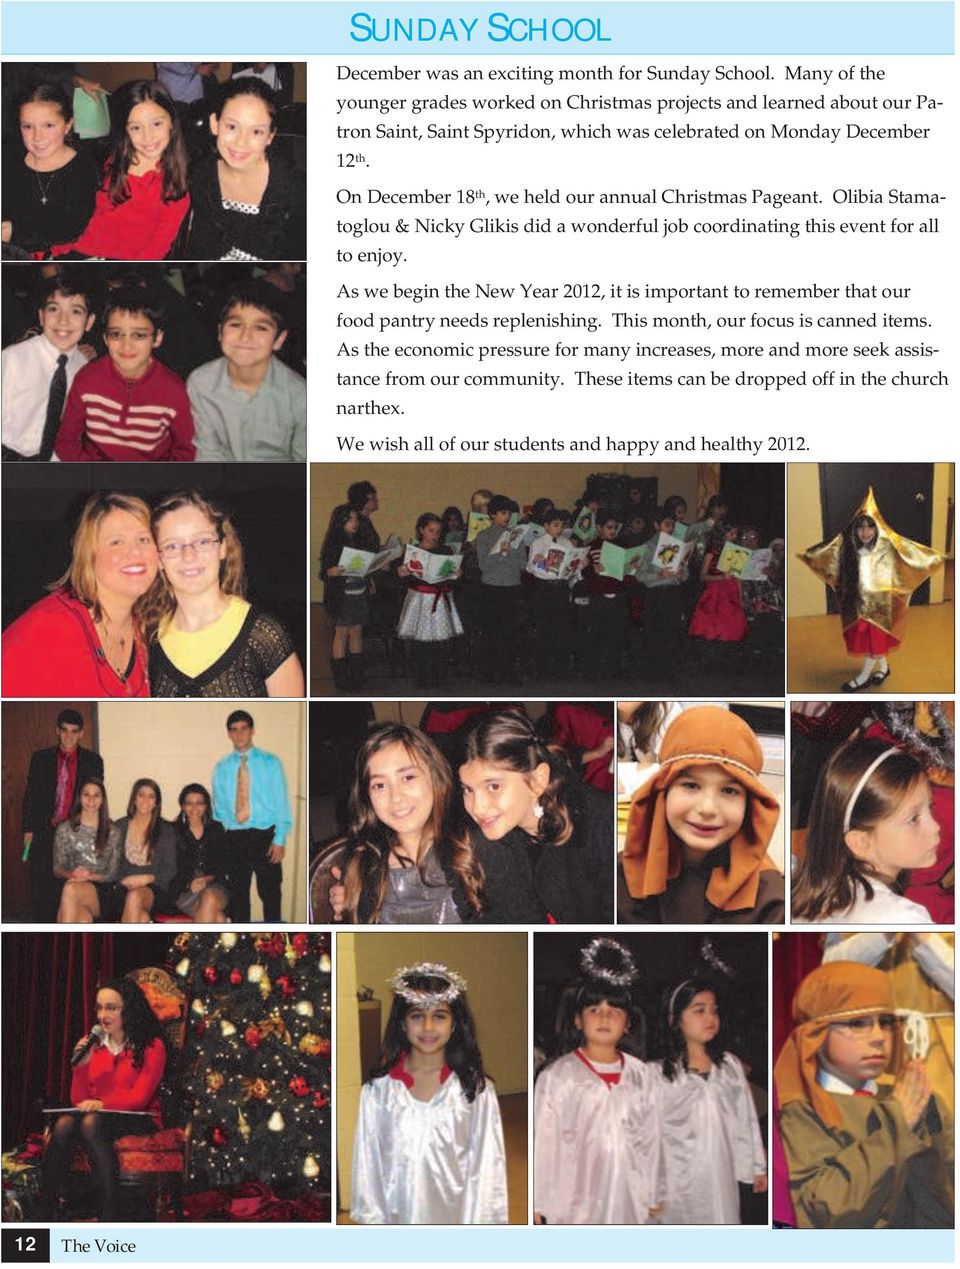 On December 18 th, we held our annual Christmas Pageant. Olibia Stamatoglou & Nicky Glikis did a wonderful job coordinating this event for all to enjoy.